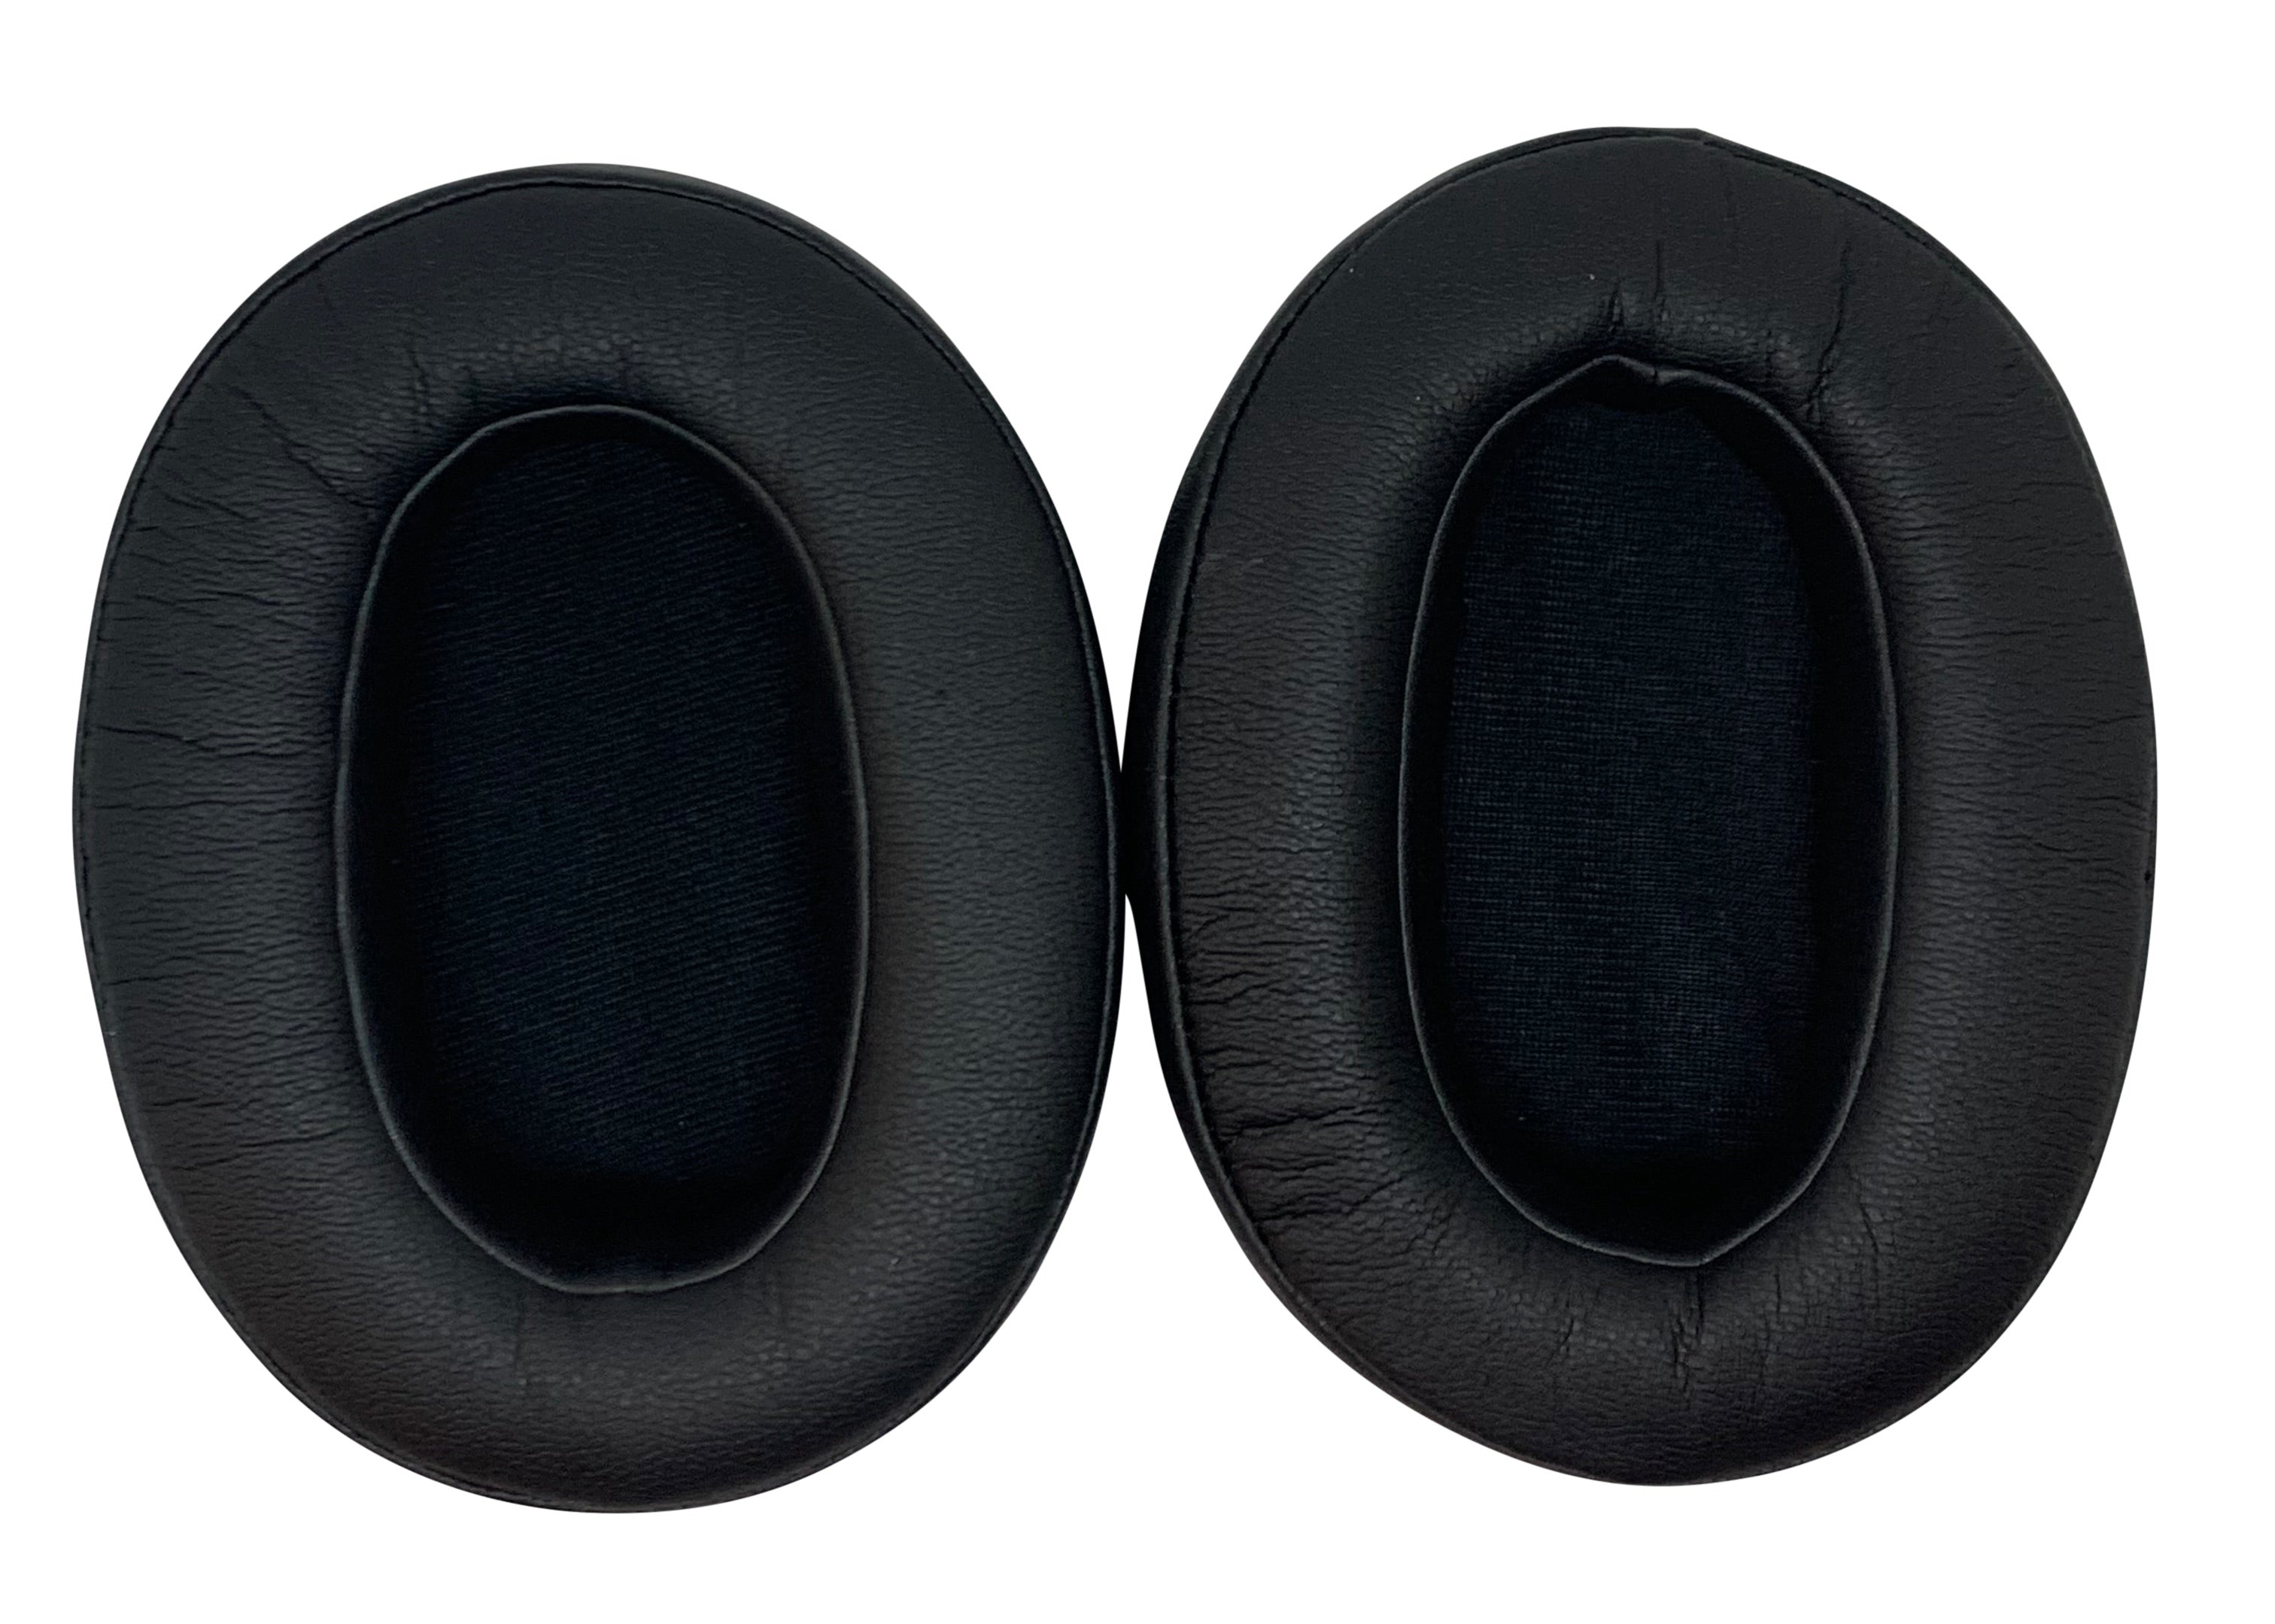 CentralSound Replacement Ear Pad Cushions for Sony WH-XB900N